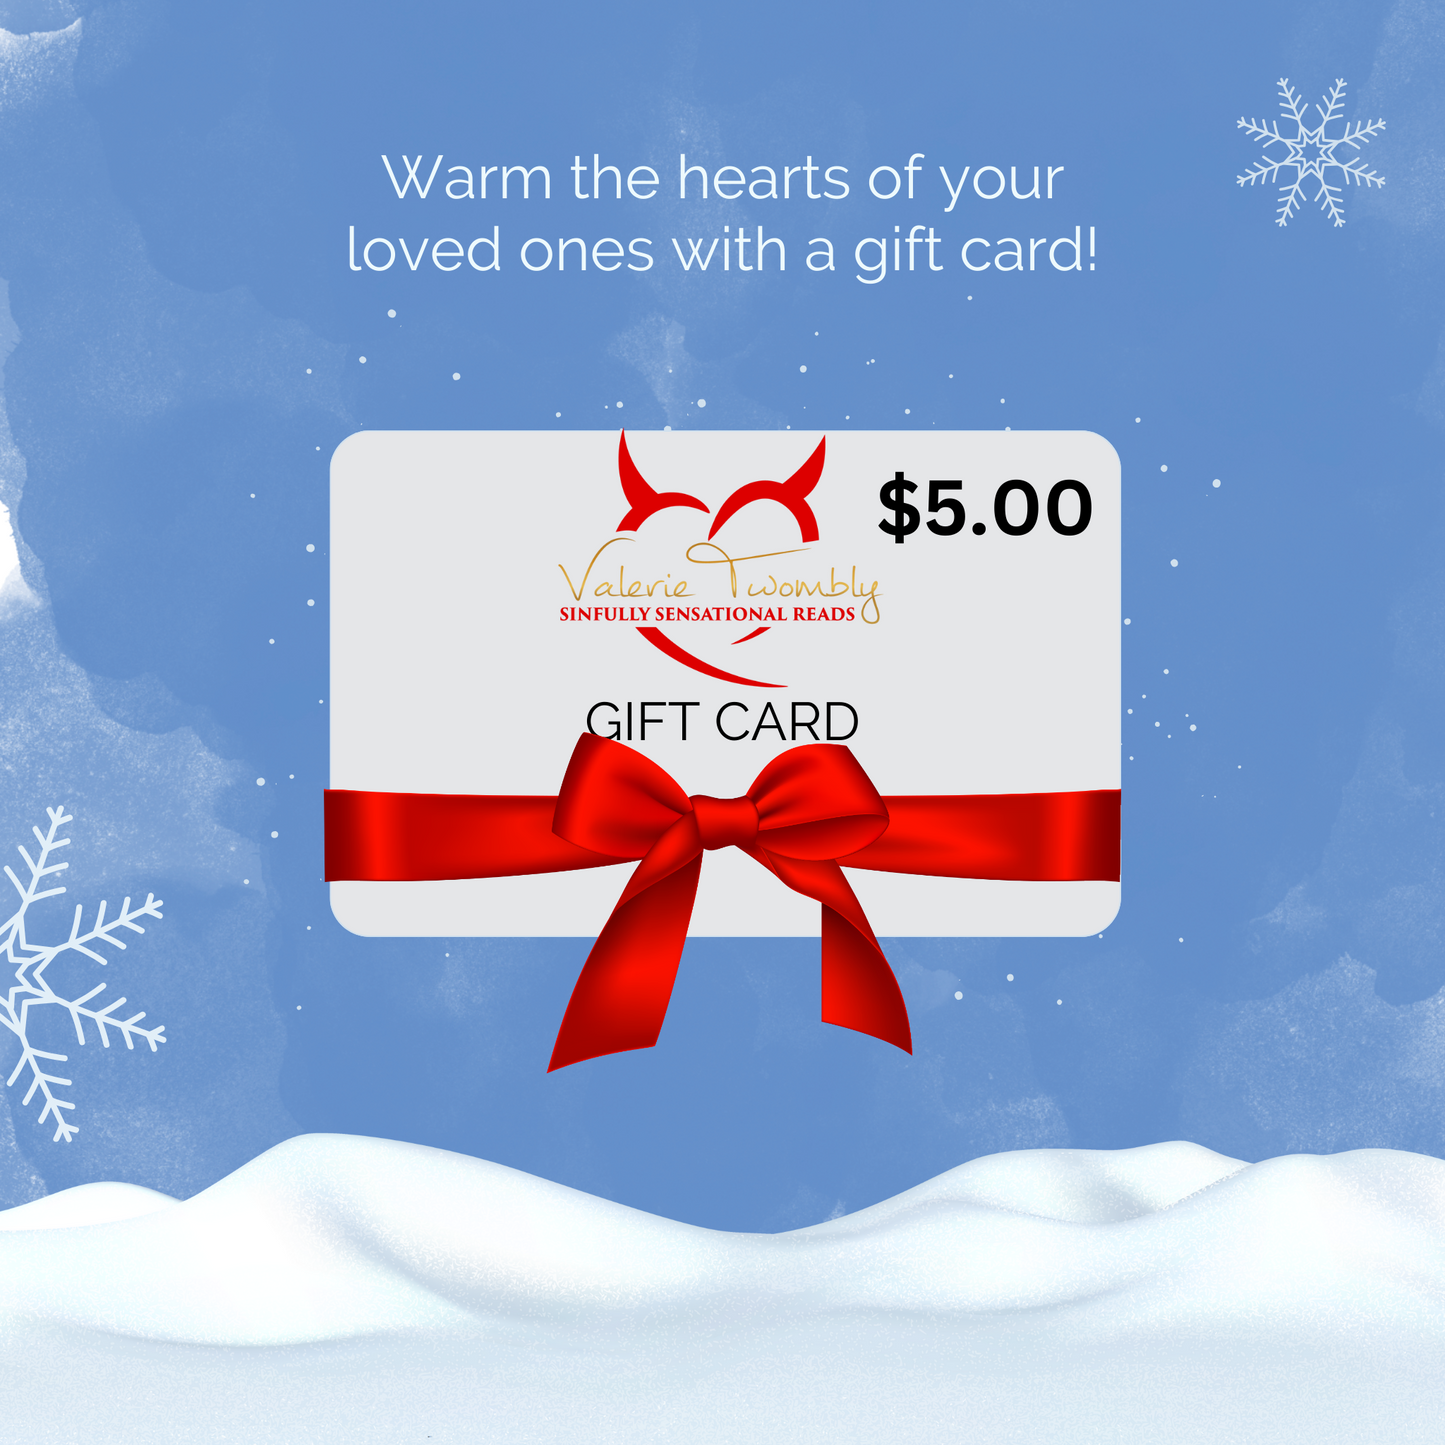 Valerie Twombly Books Gift Card